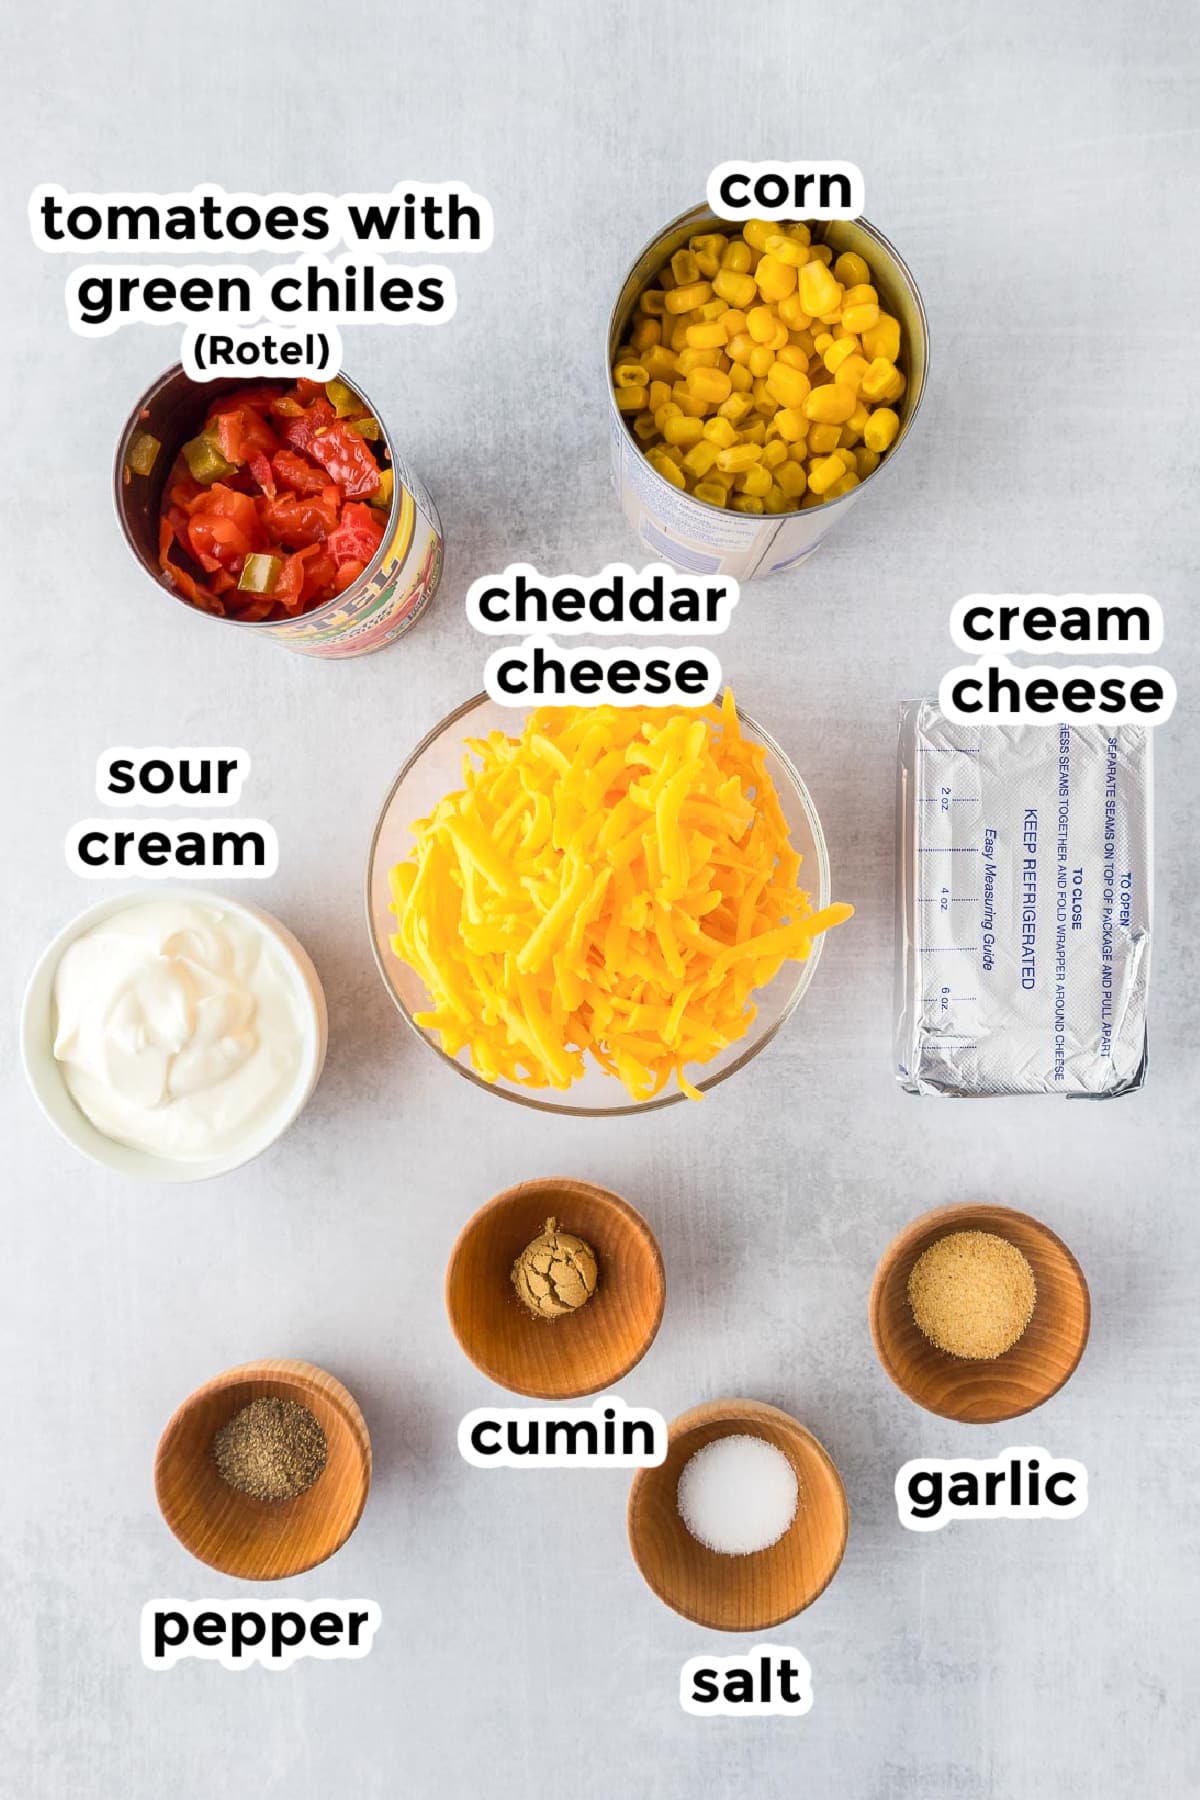 Ingredients arranged on a surface including canned tomatoes with green chiles, corn, shredded cheddar cheese, cream cheese, sour cream, pepper, cumin, salt, and garlic.